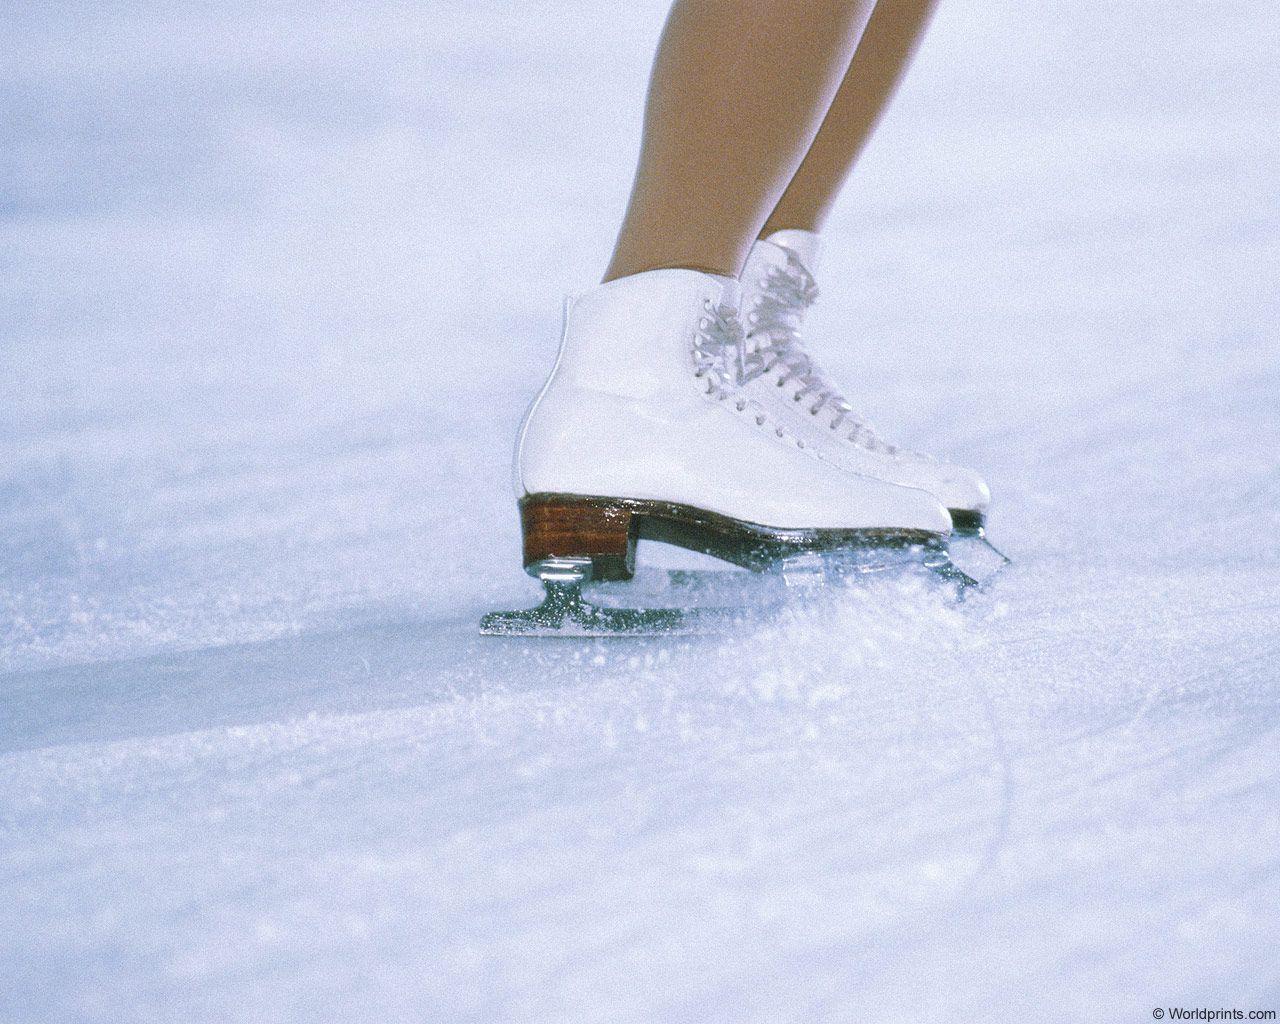 HD wallpaper person in white ice skating shoes on ice rink skates figure  skating  Wallpaper Flare